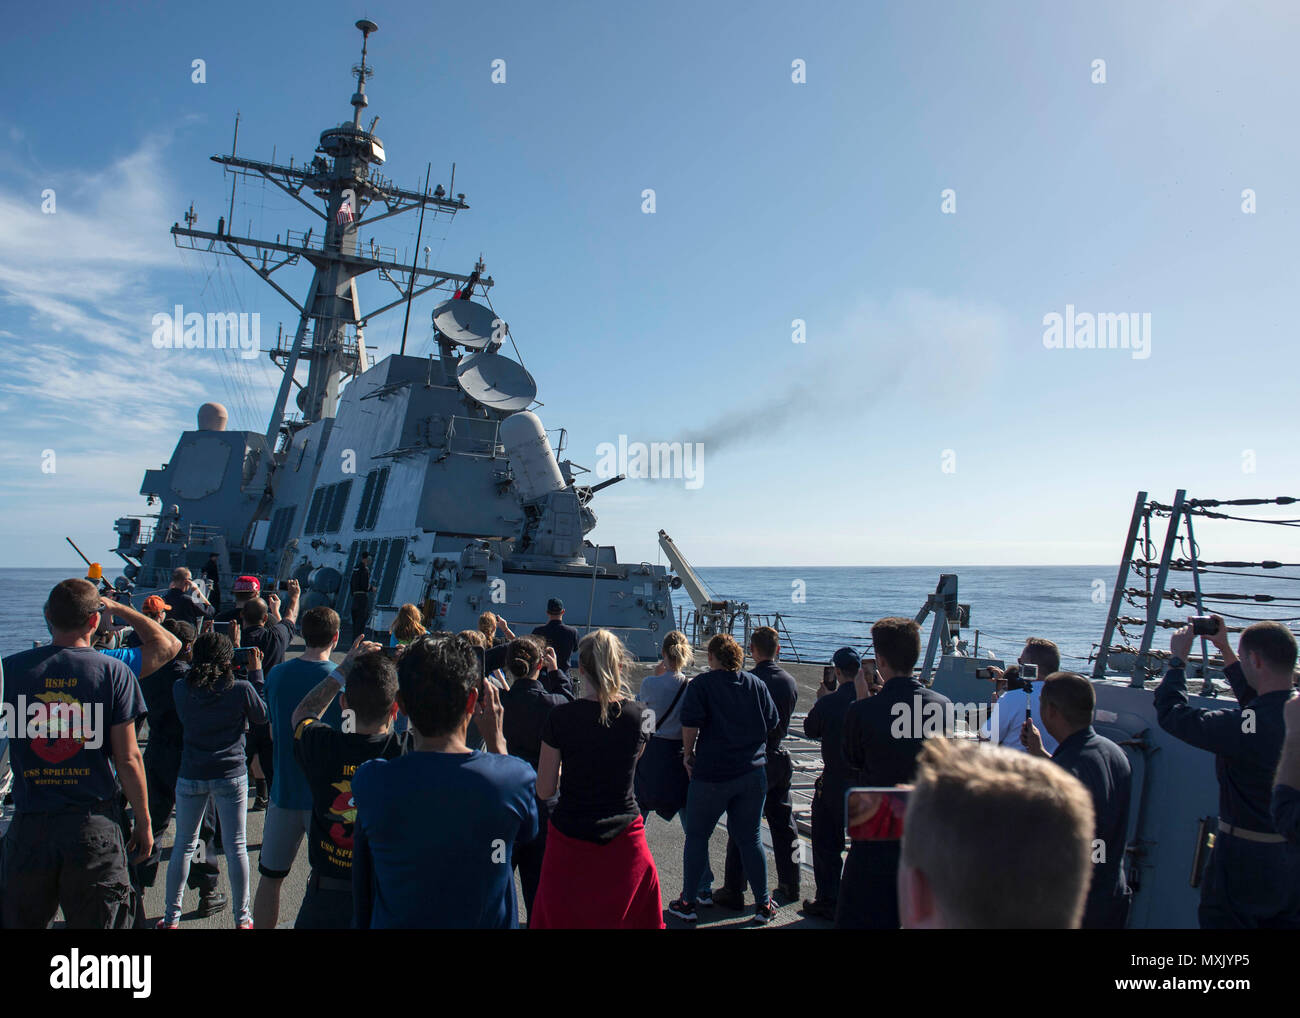 161110-N-SU278-190 PACIFIC OCEAN (Nov. 9, 2016) Sailors assigned to the guided-missile destroyer USS Spruance (DDG 111) and embarked friends and family members aboard during a tiger cruise watch a demonstration of the ship’s close-in weapons system in the Pacific Ocean, Nov. 9, 2016. Spruance and the guided-missile destroyers USS Decatur (DDG 73) and USS Momsen (DDG 92), along with embarked “Warbirds” and “Devilfish” detachments of Helicopter Maritime Strike Squadron (HSM) 49, are finishing up a seven-month deployment in support of maritime security and stability in the Indo-Asia-Pacific as pa Stock Photo